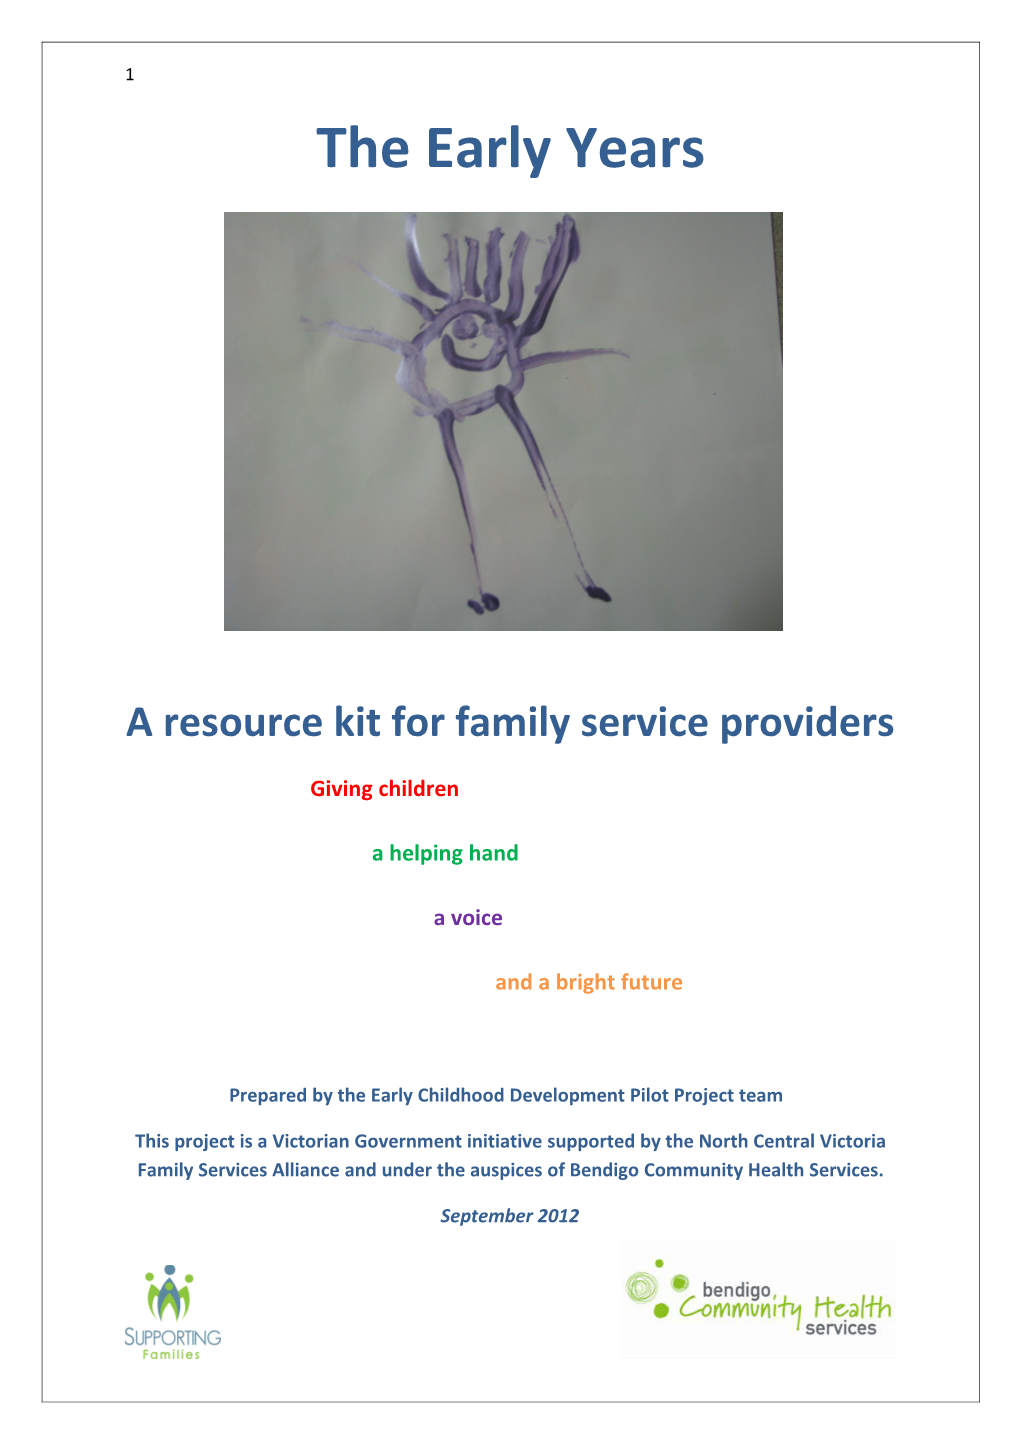 A Resource Kit for Family Service Providers